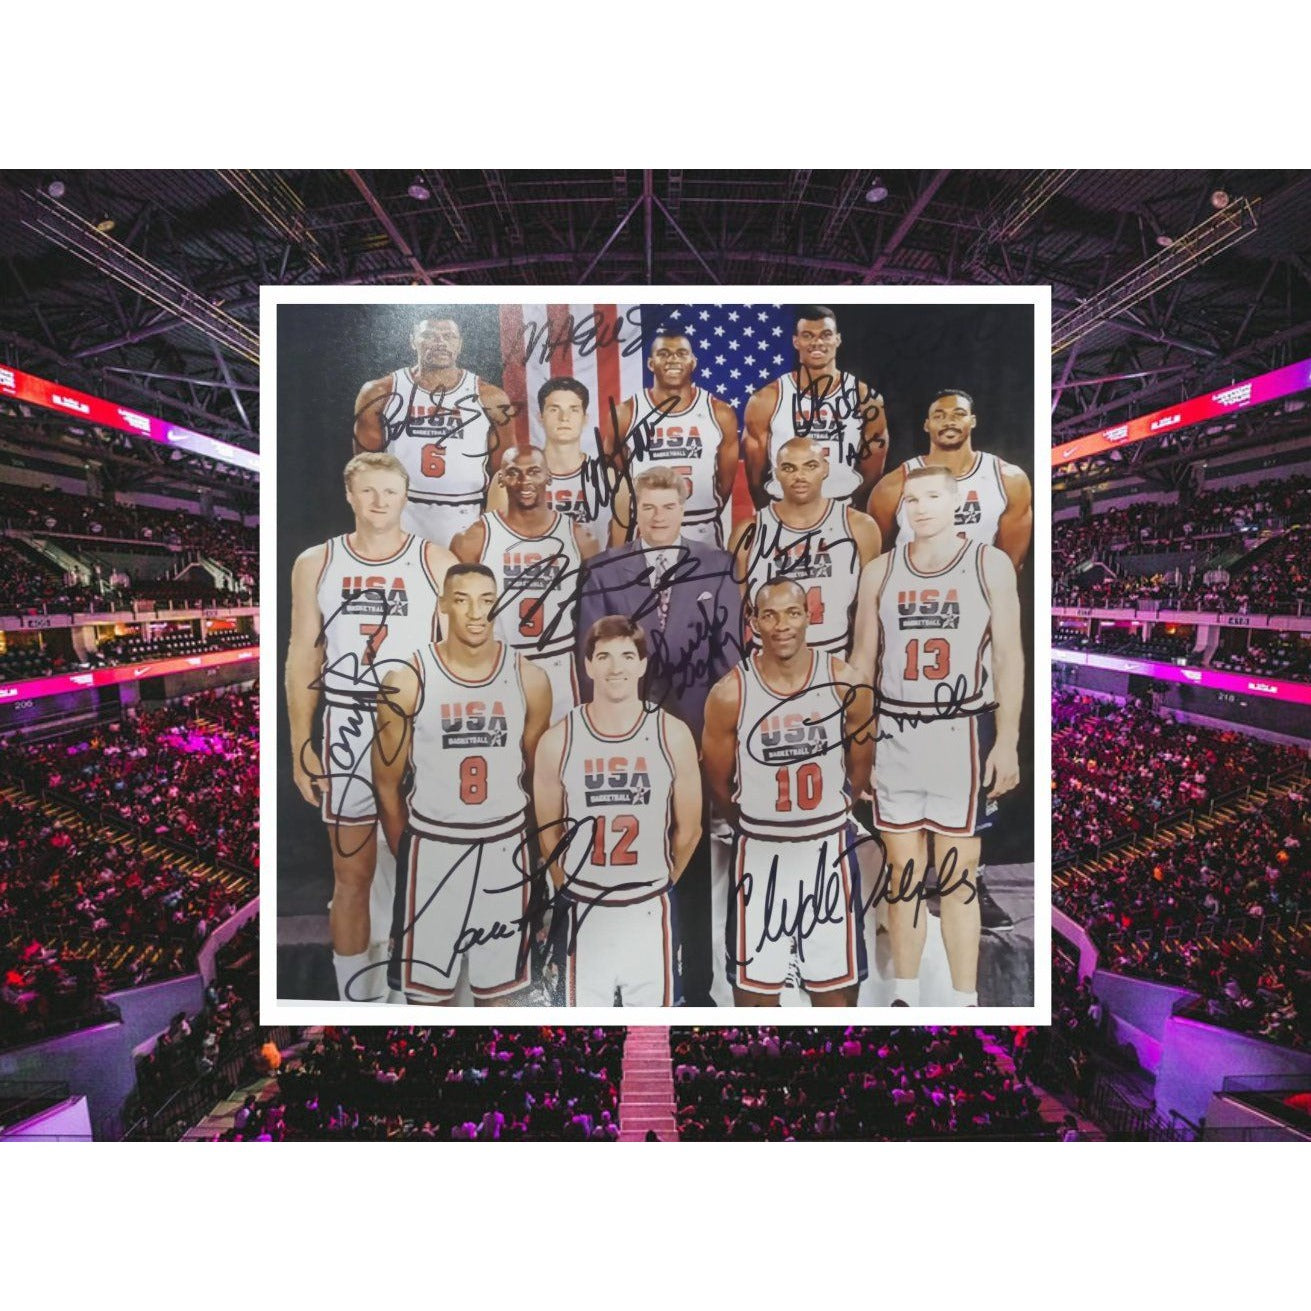 Michael Jordan Charles Barkley Larry Bird Chuck Daly u.s.a. Dream Team 11 by 14 photo signed with proof